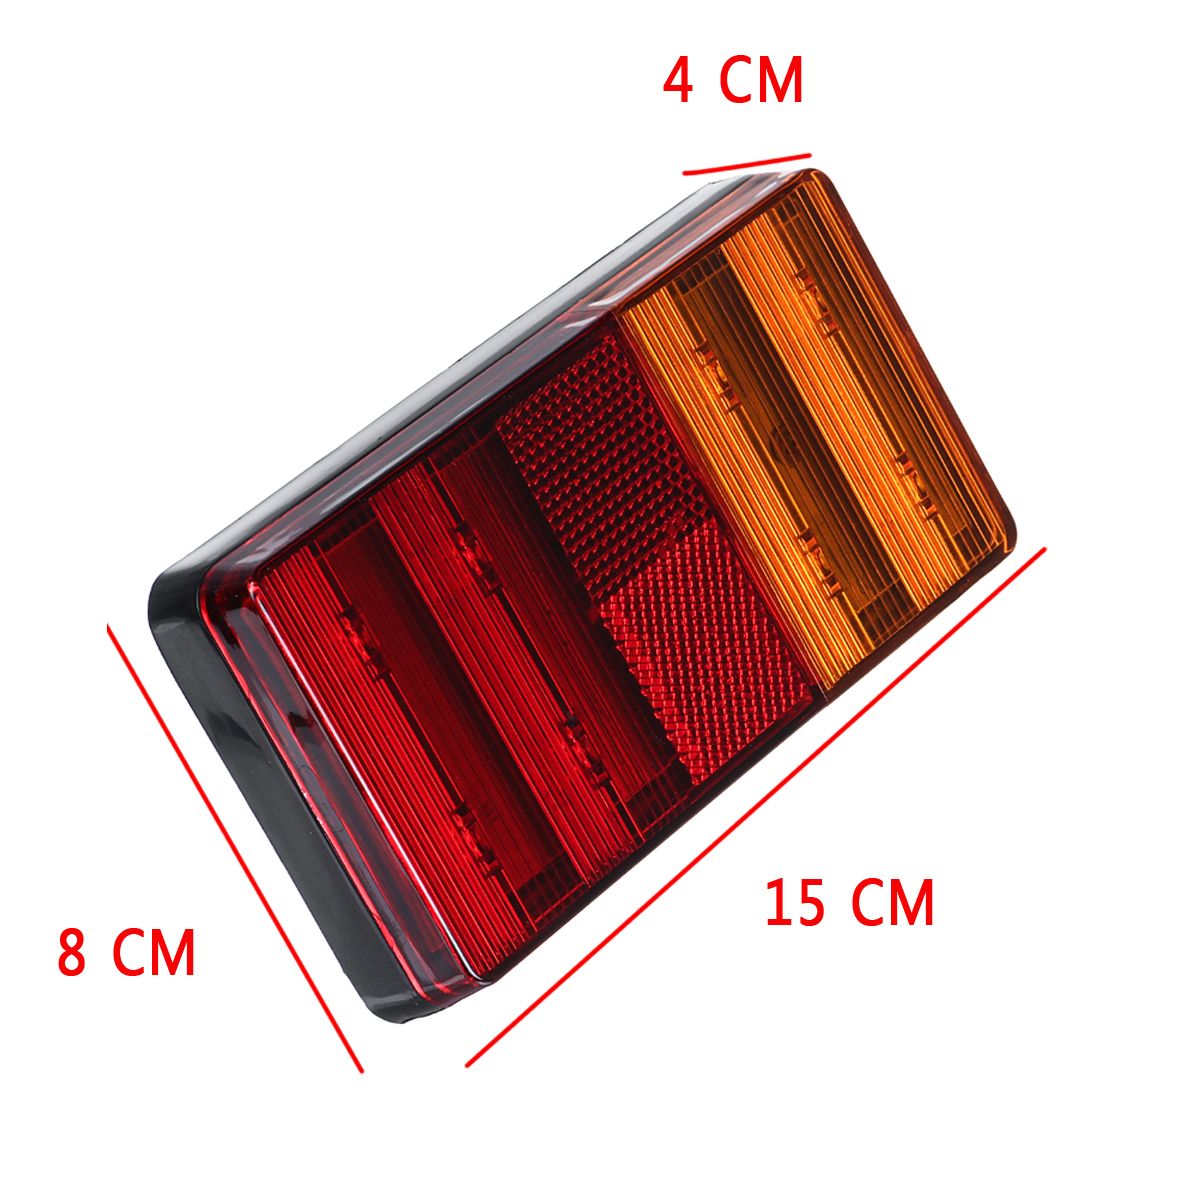 2PCS-8-LED-Tail-Brake-Indicator-Lights-IP67-Waterproof-Red-Yellow-Color-Universal-For-12V-Truck-Trai-1562508